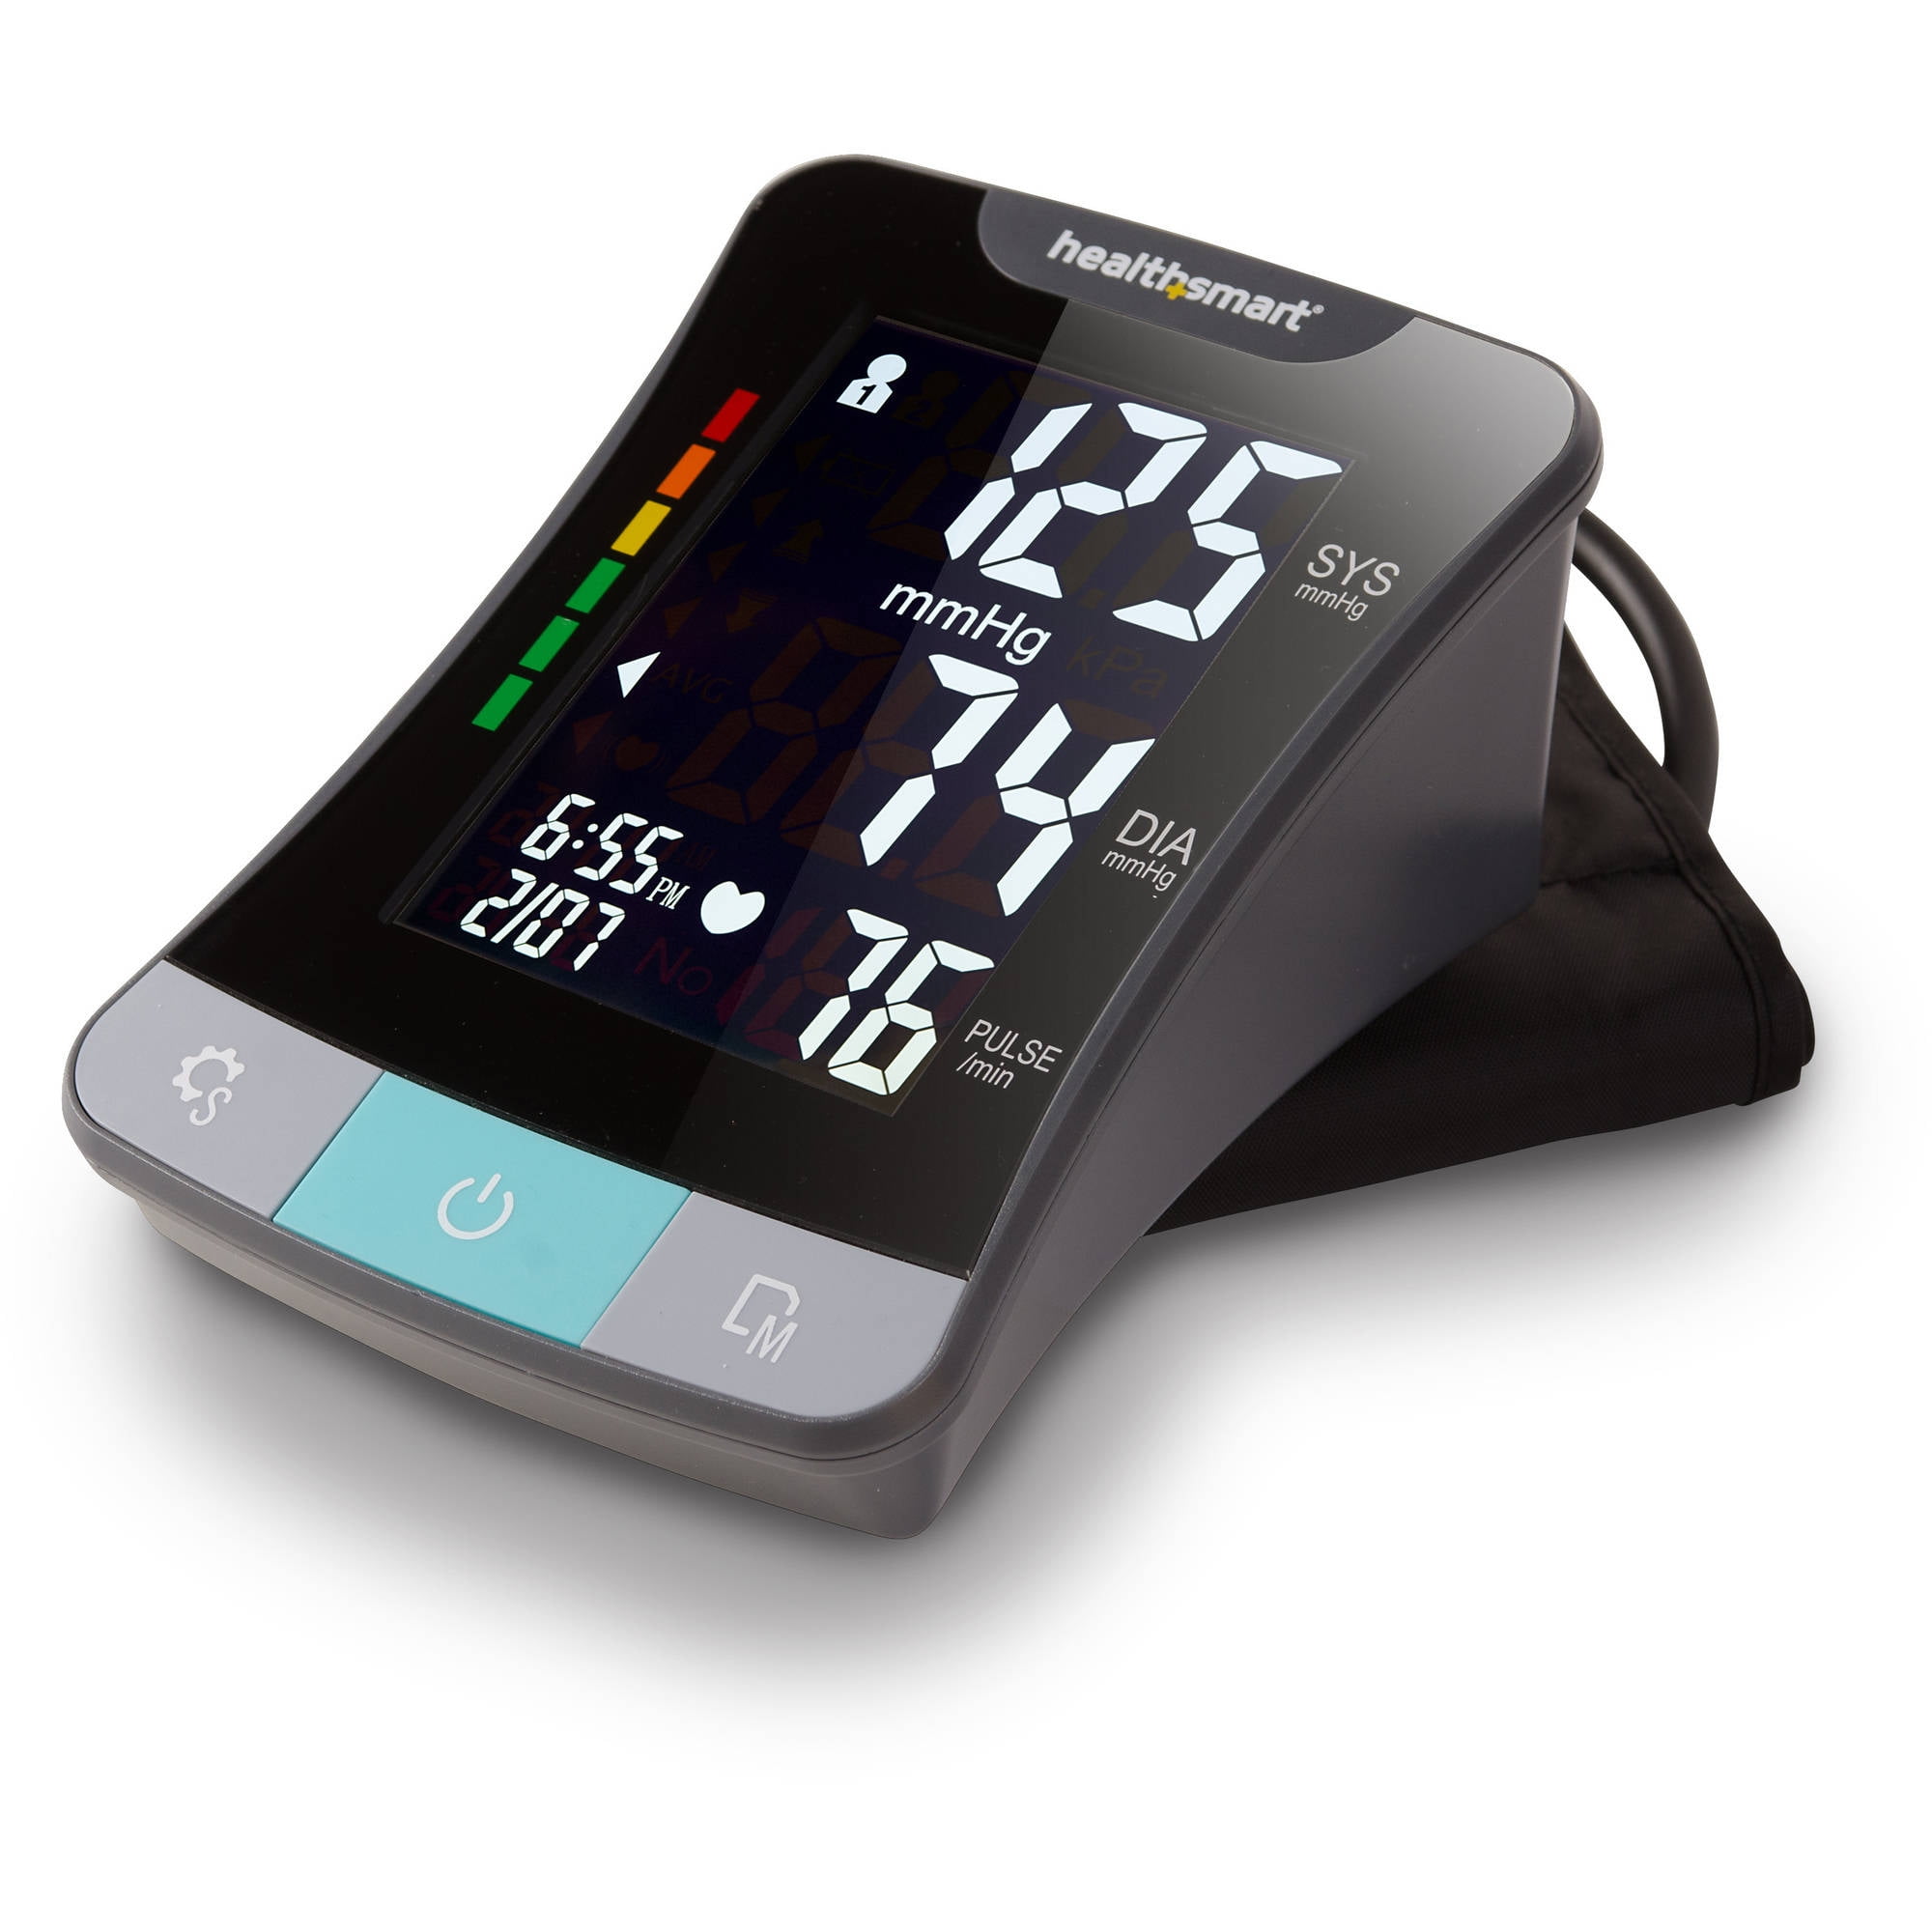 Wrist Electronic Blood Pressure Monitor with Large Screen Display,  Miscellaneous: Bernell Corporation